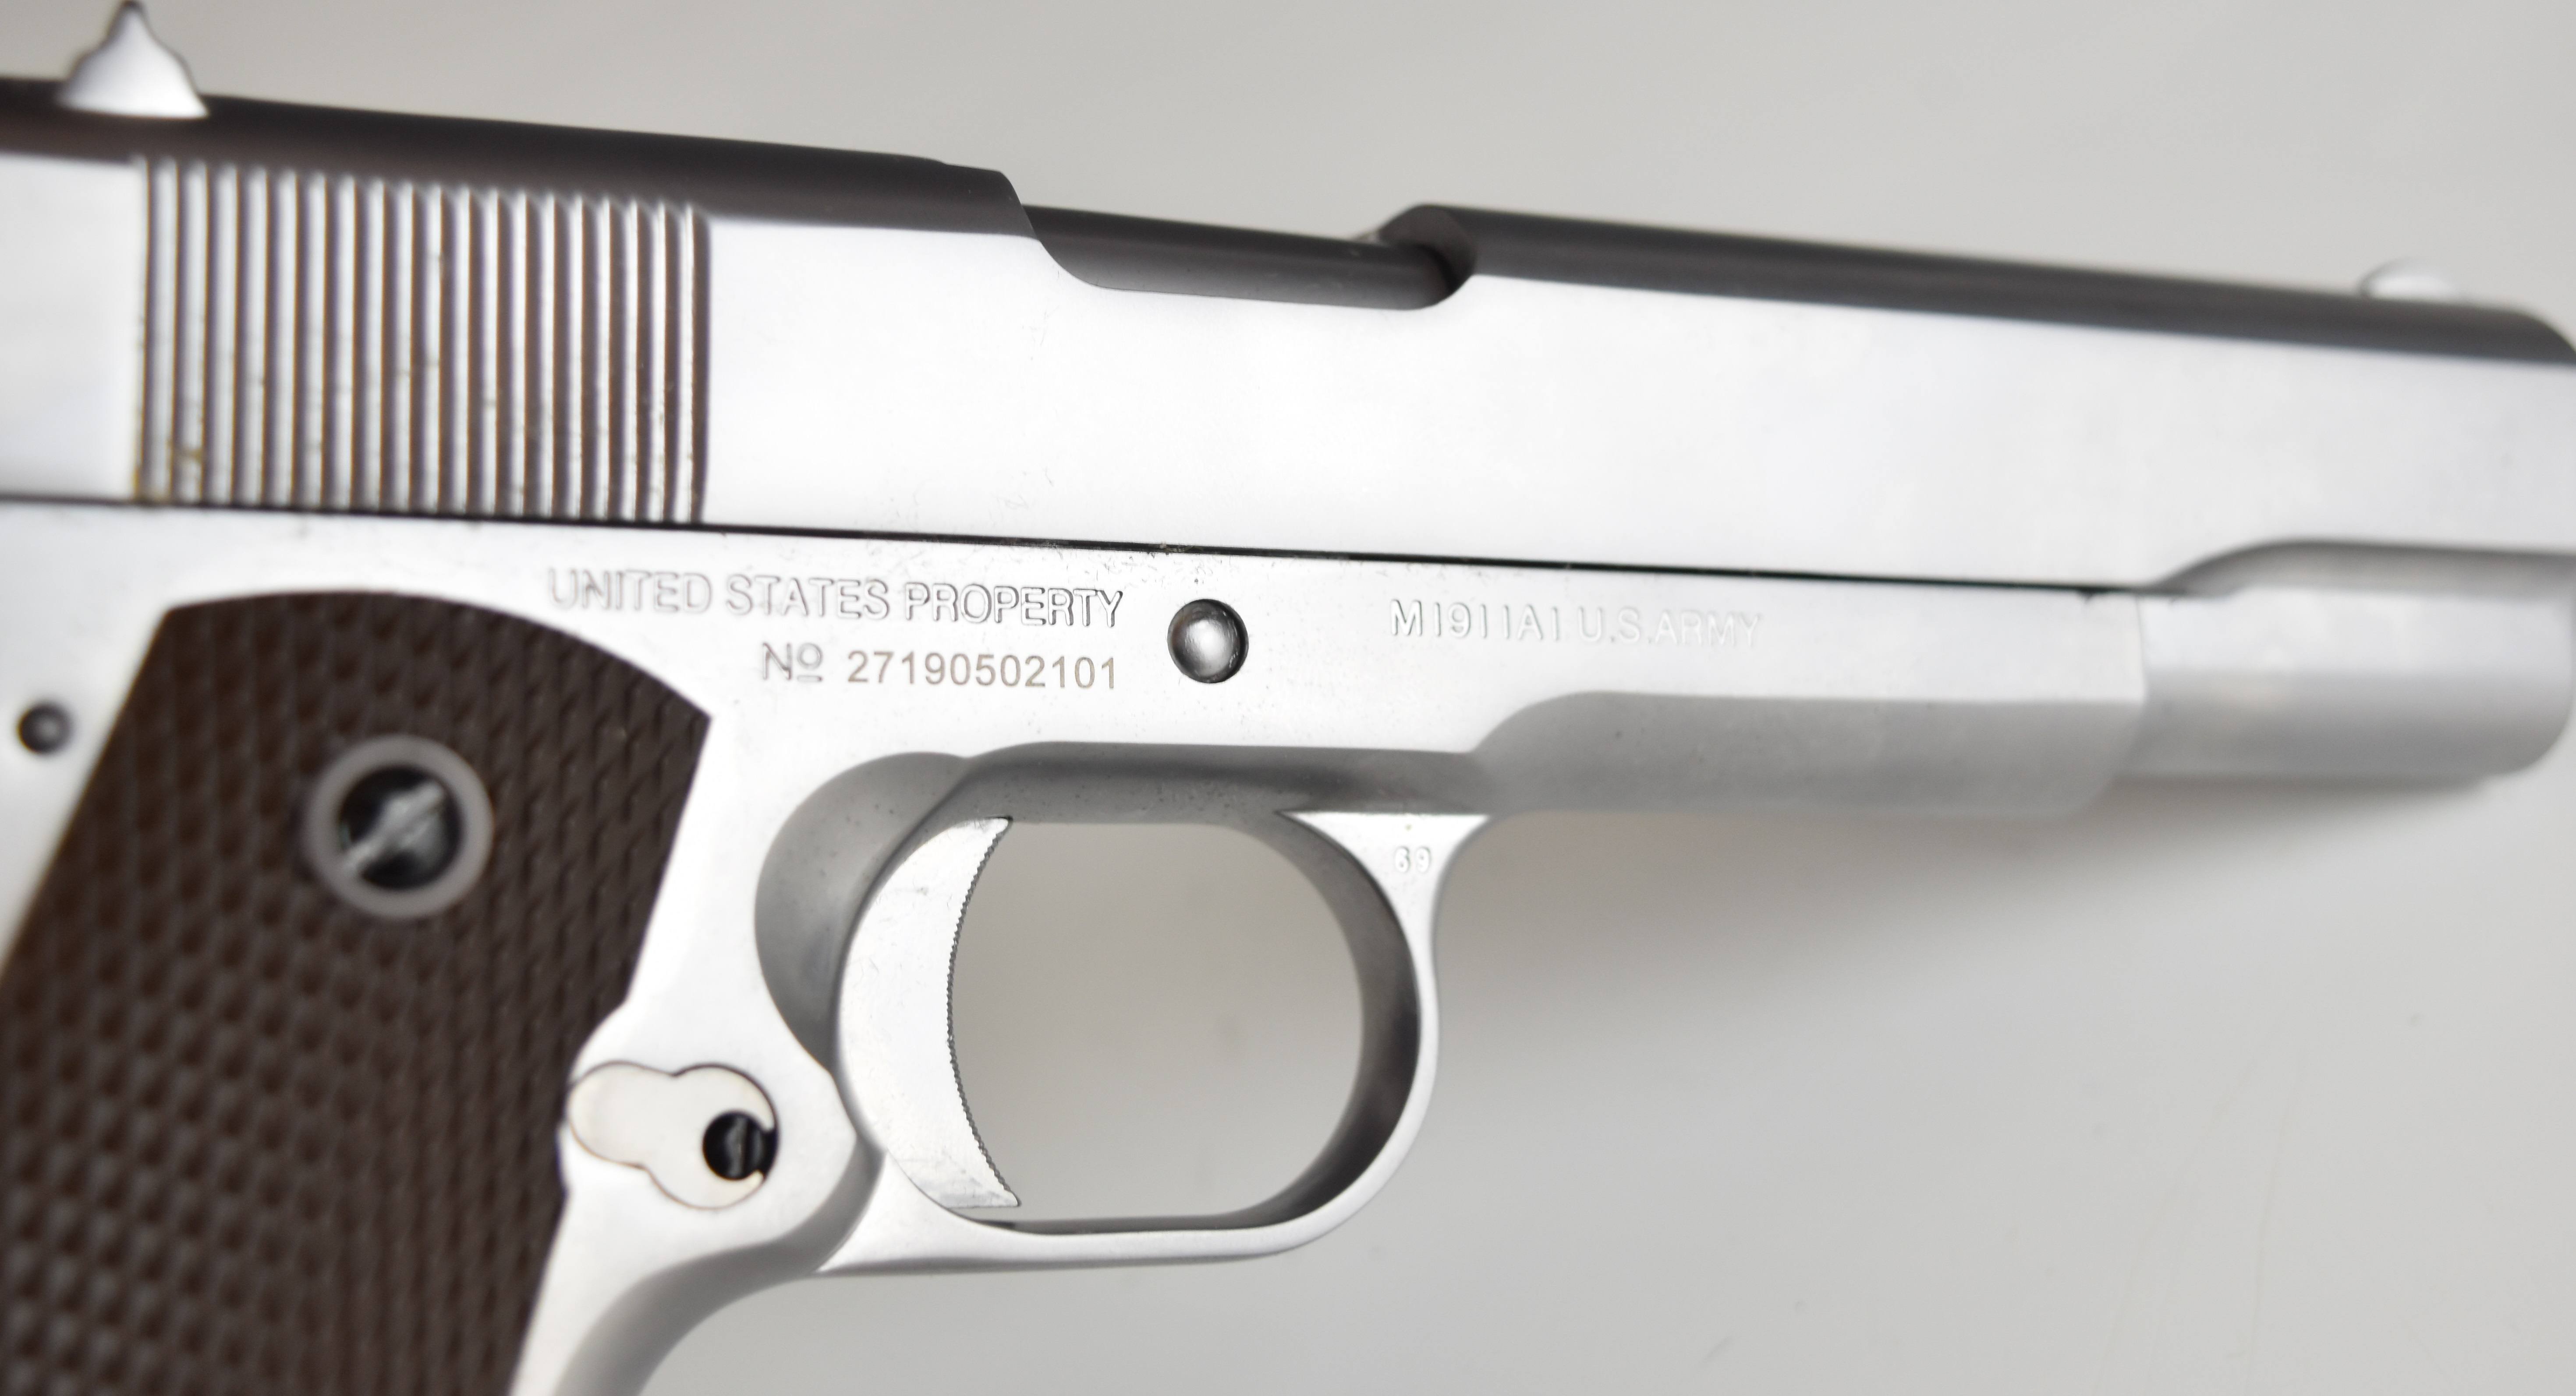 Cybergun Colt 1911 6mm CO2 airsoft pistol with chequered faux wooden grips, multi-shot magazine - Image 15 of 16